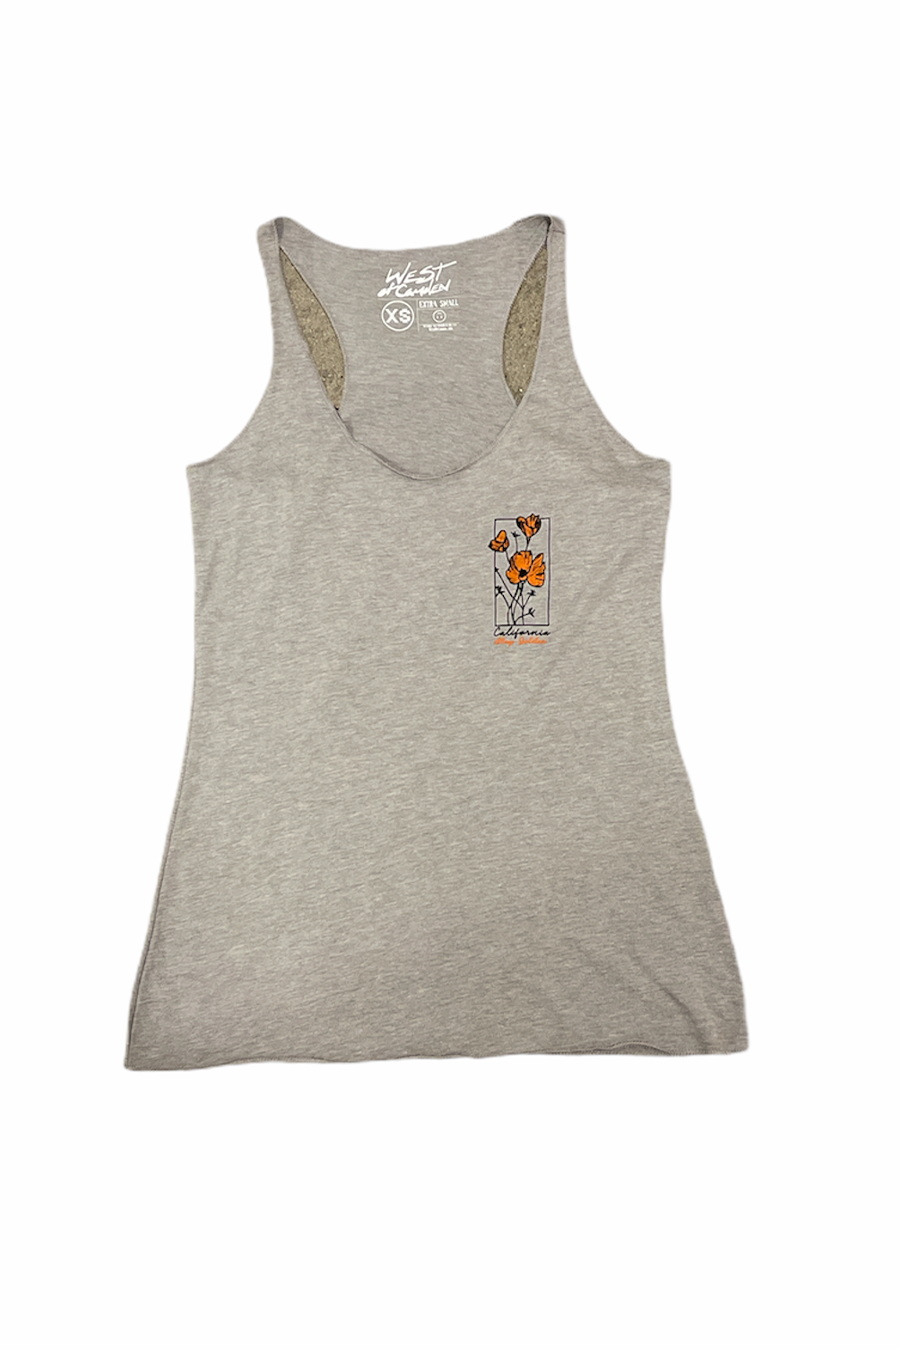 Stay Golden (CA Poppy) Tank | Grey - Main Image Number 1 of 1